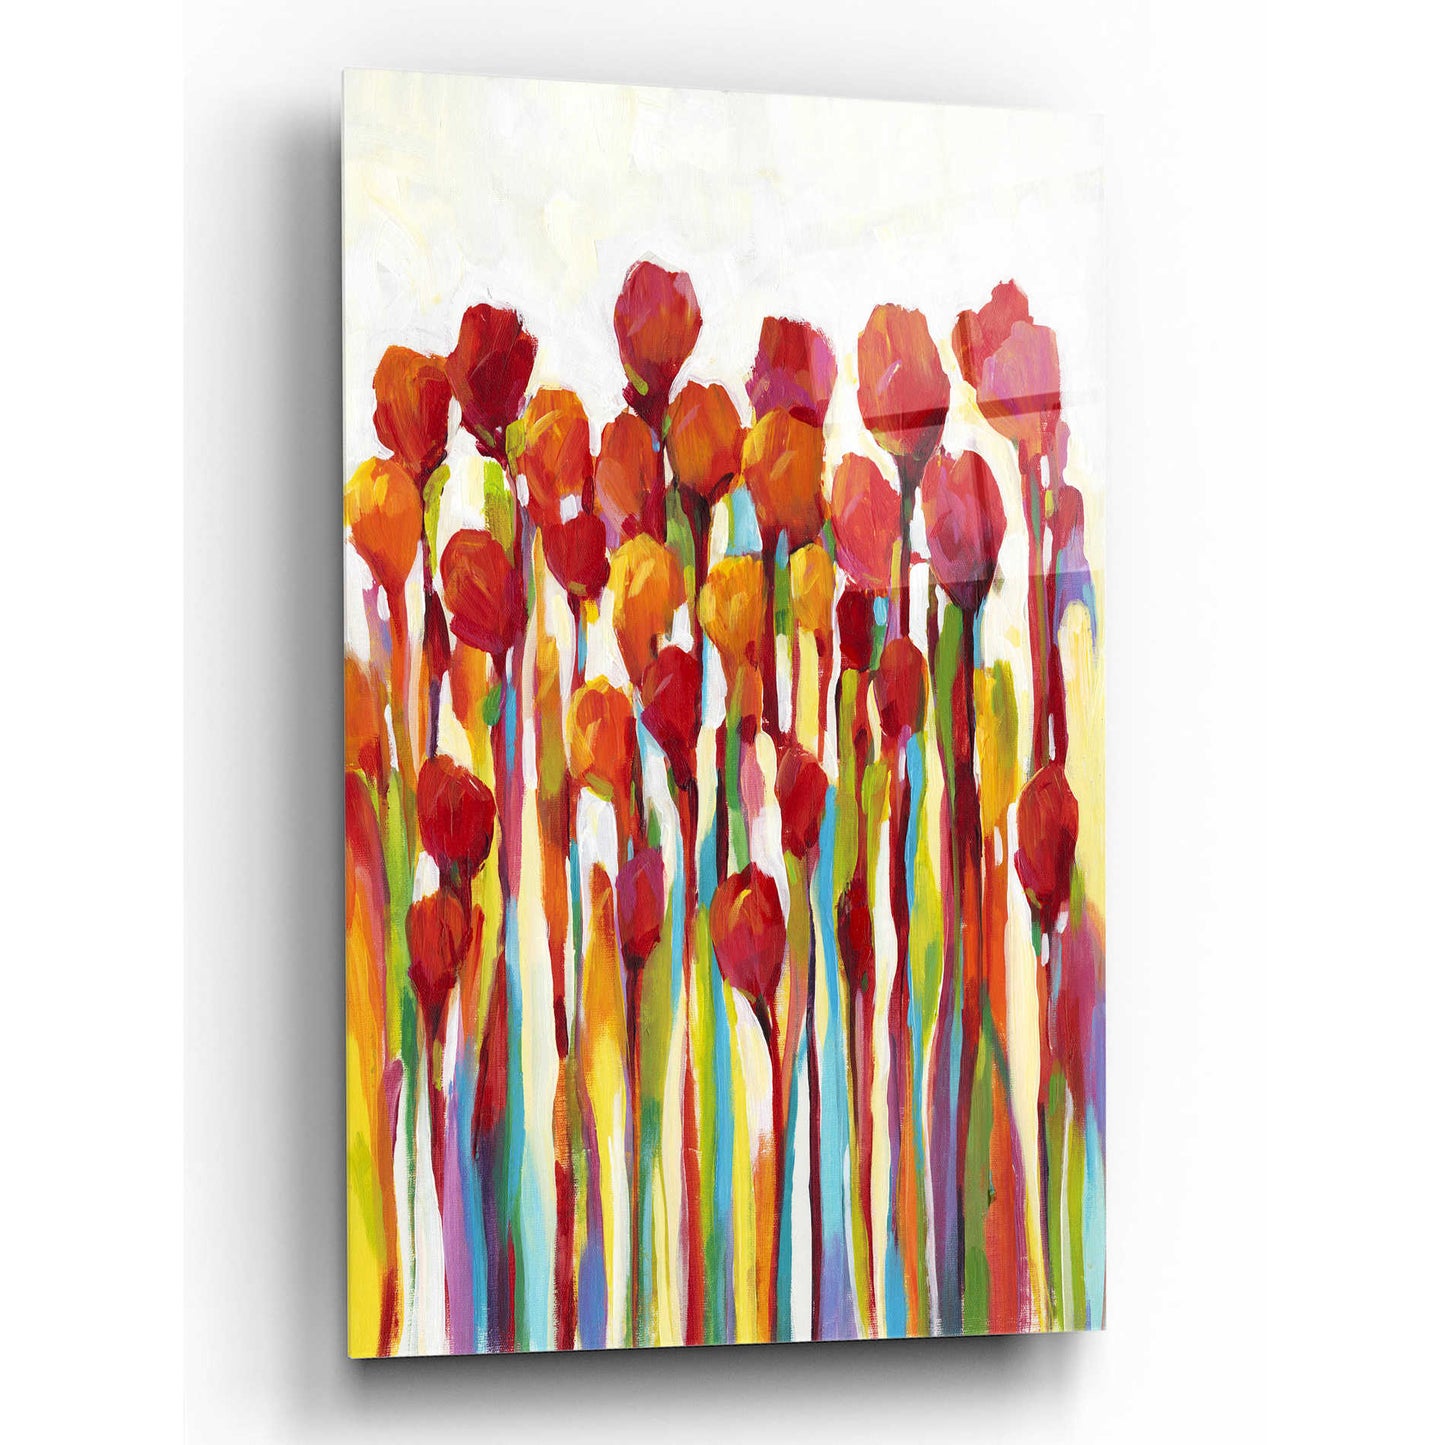 Epic Art 'Bursting with Color I' by Tim O'Toole, Acrylic Glass Wall Art